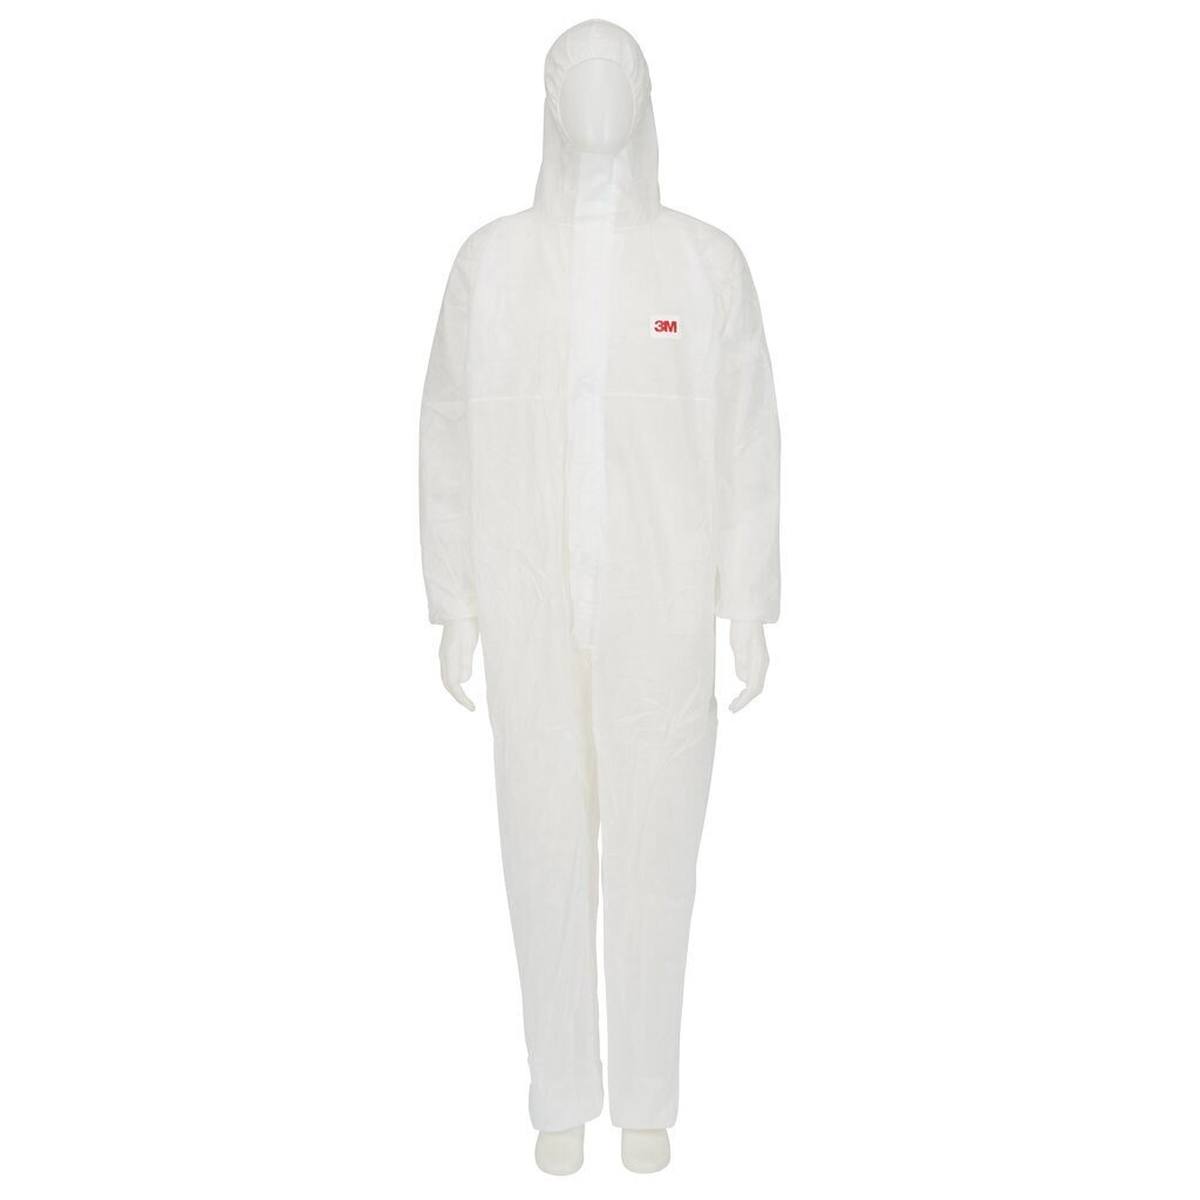 3M 4500 W Protective suit, white, CE, size 3XL, material polypropylene, elasticated cuffs